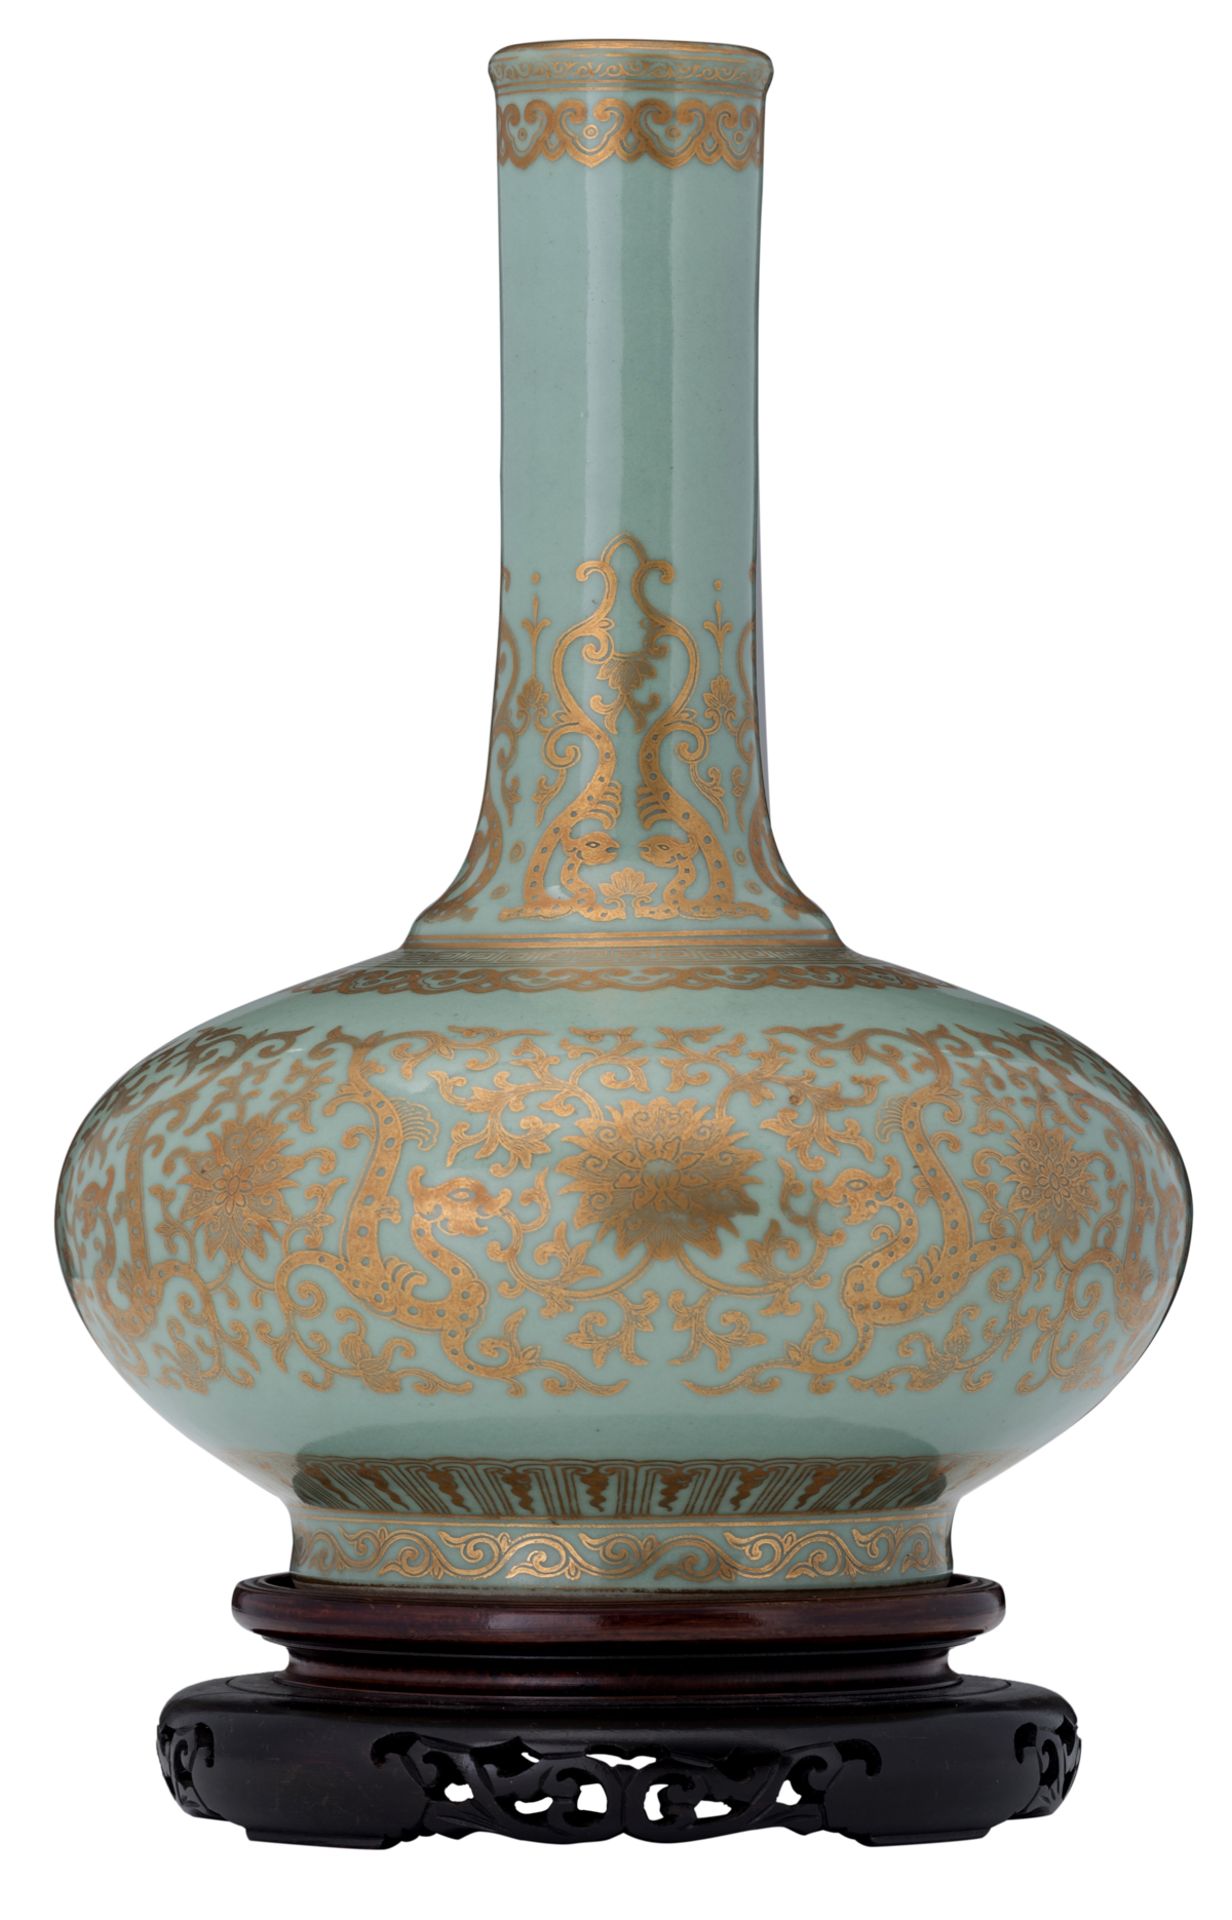 A Chinese celadon ground gilt decorated bottle vase, with a Qianlong mark, H 33,5 cm